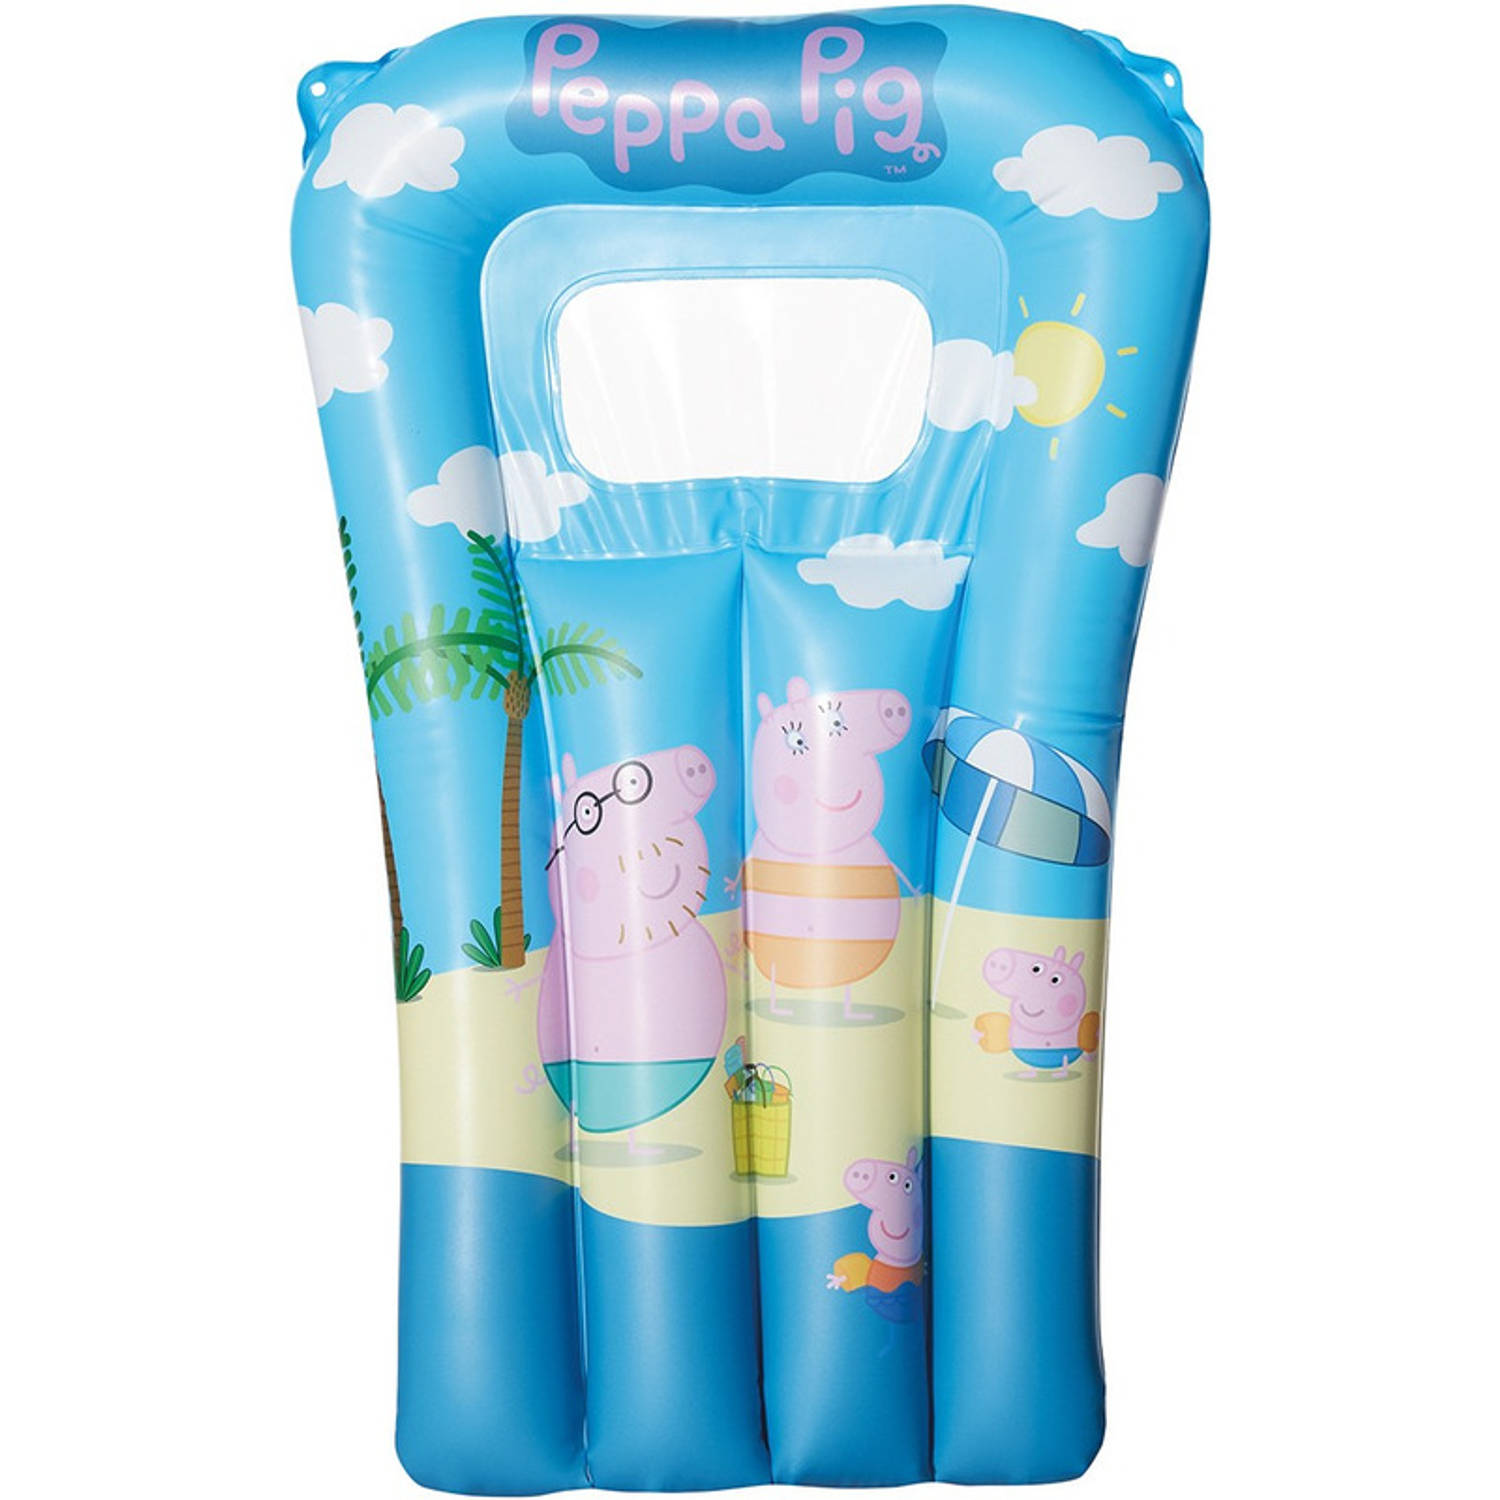 Happy People luchtbed Peppa Pig 67 x 43 cm blauw